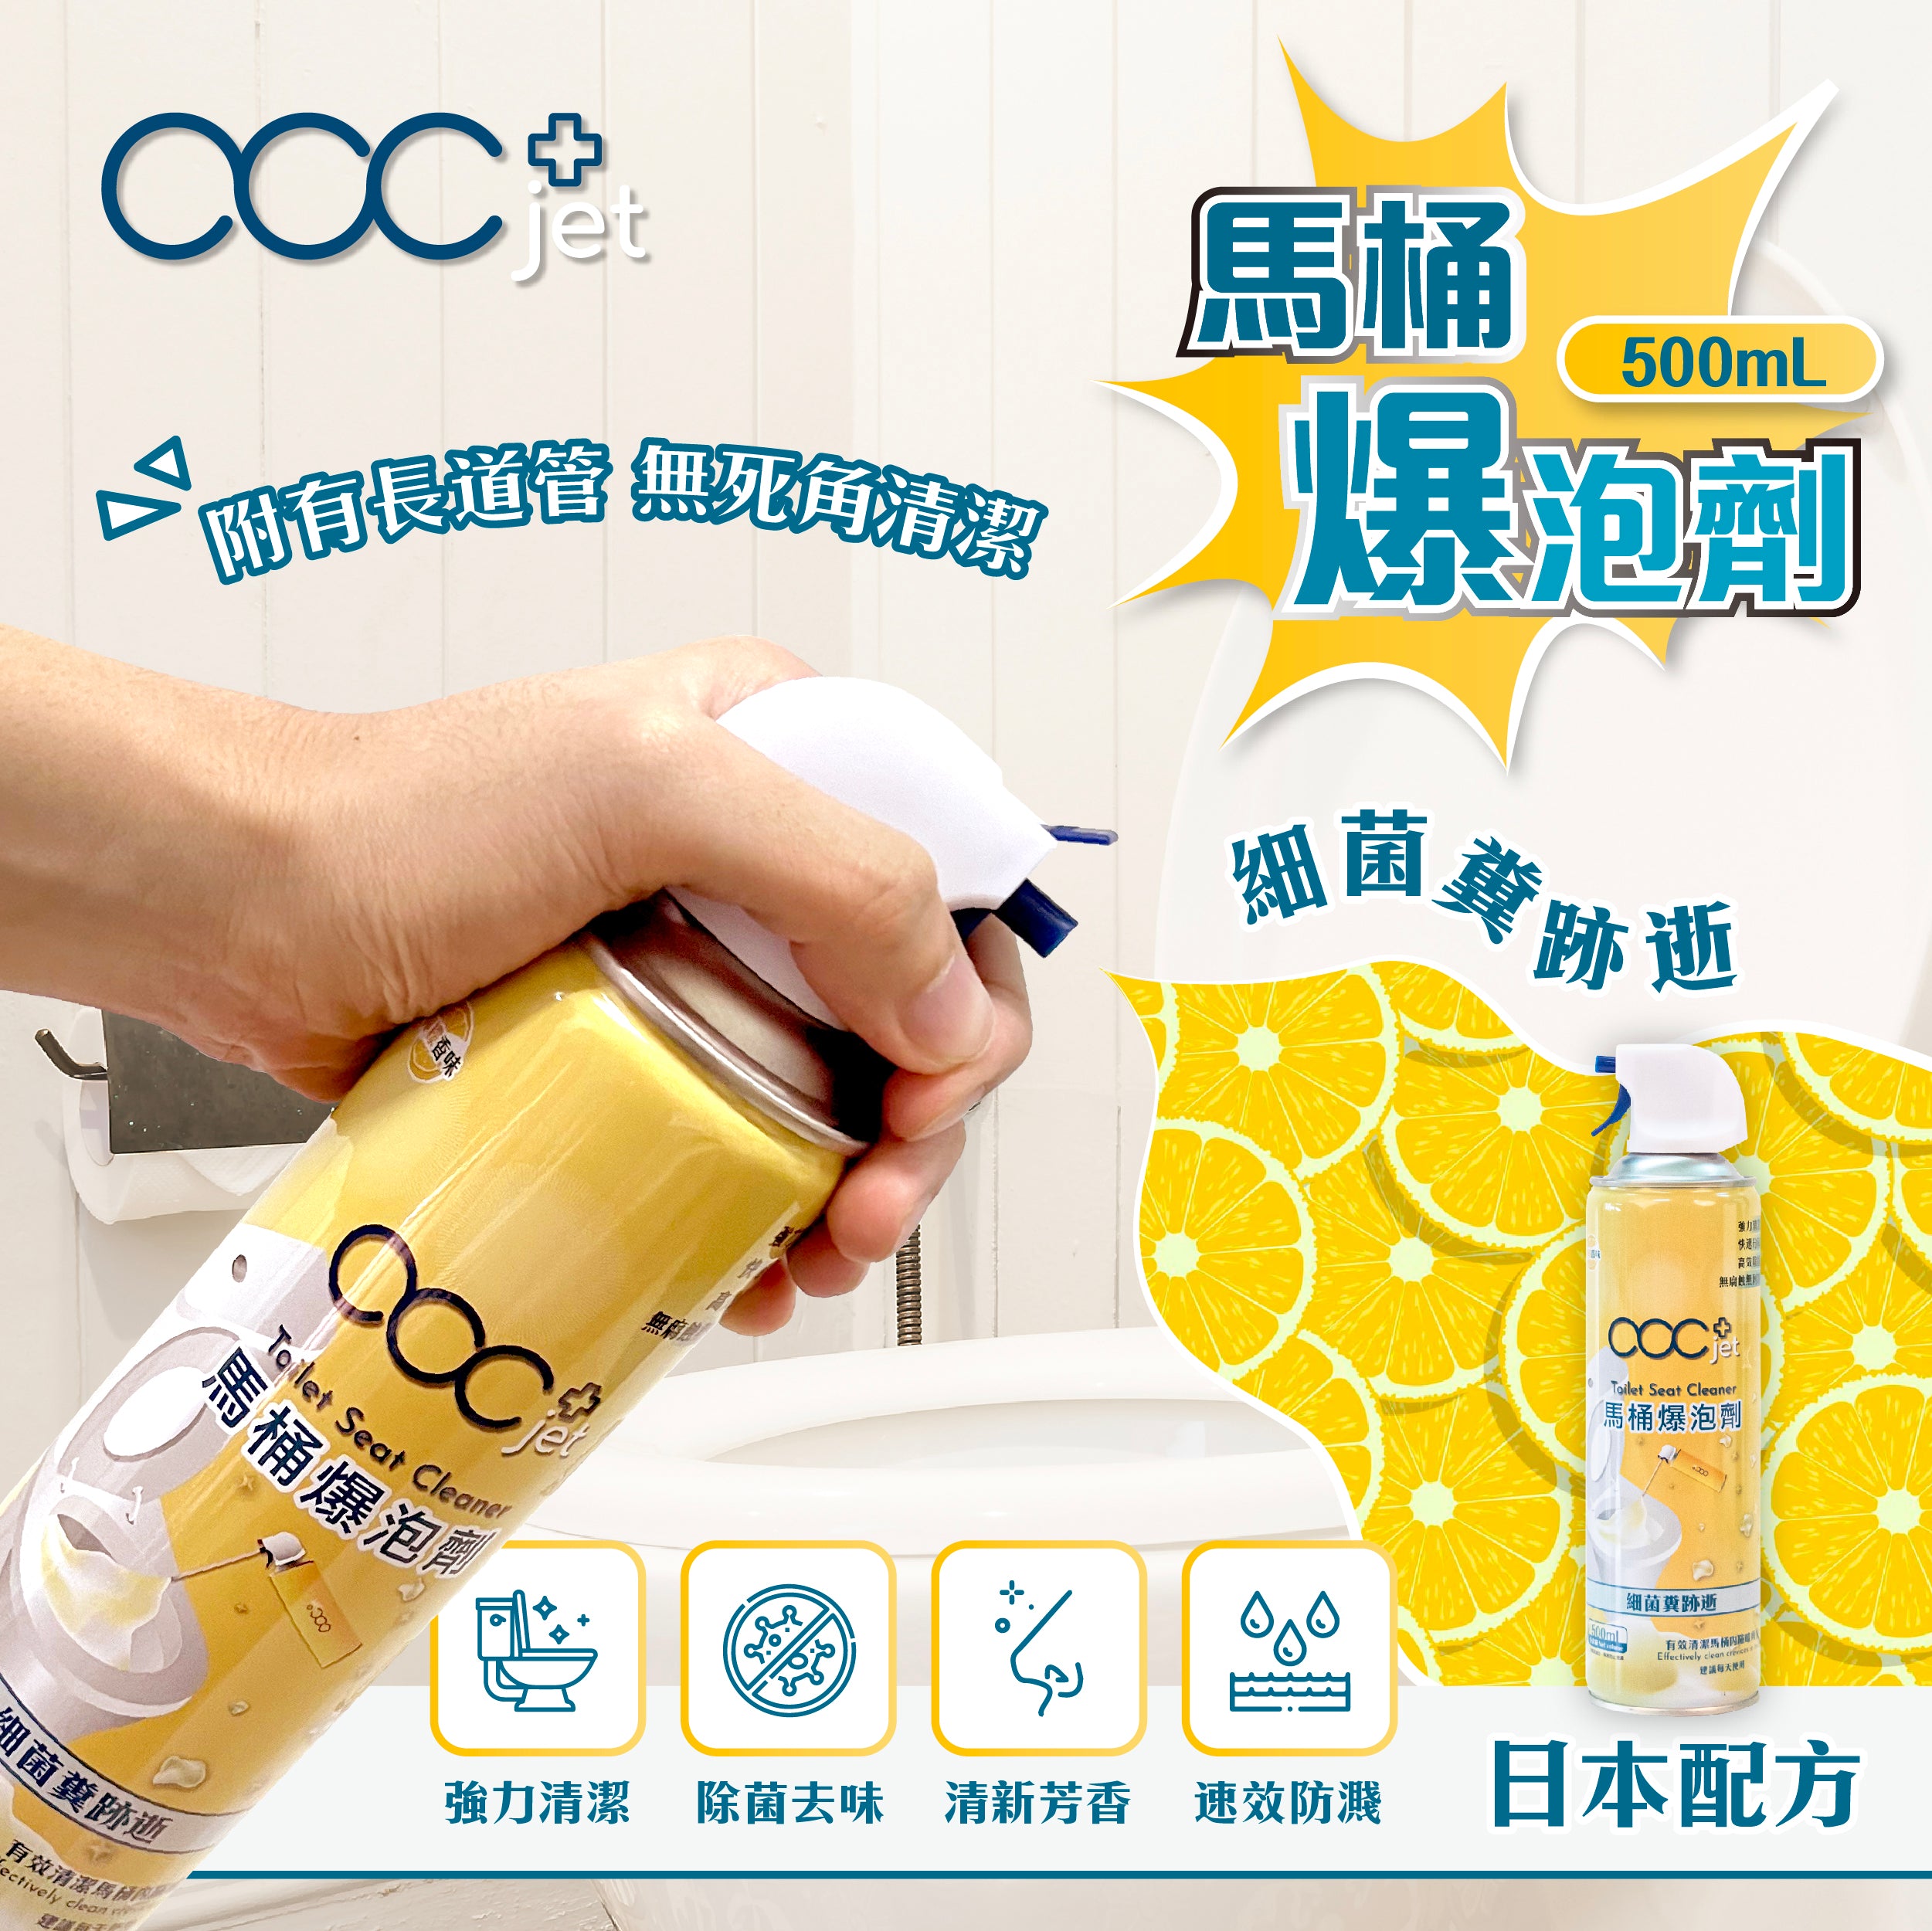 acc+ jet toilet blasting agent is available in Japantown/Abutai/HKTVmall, which effectively cleans the bacteria and feces 